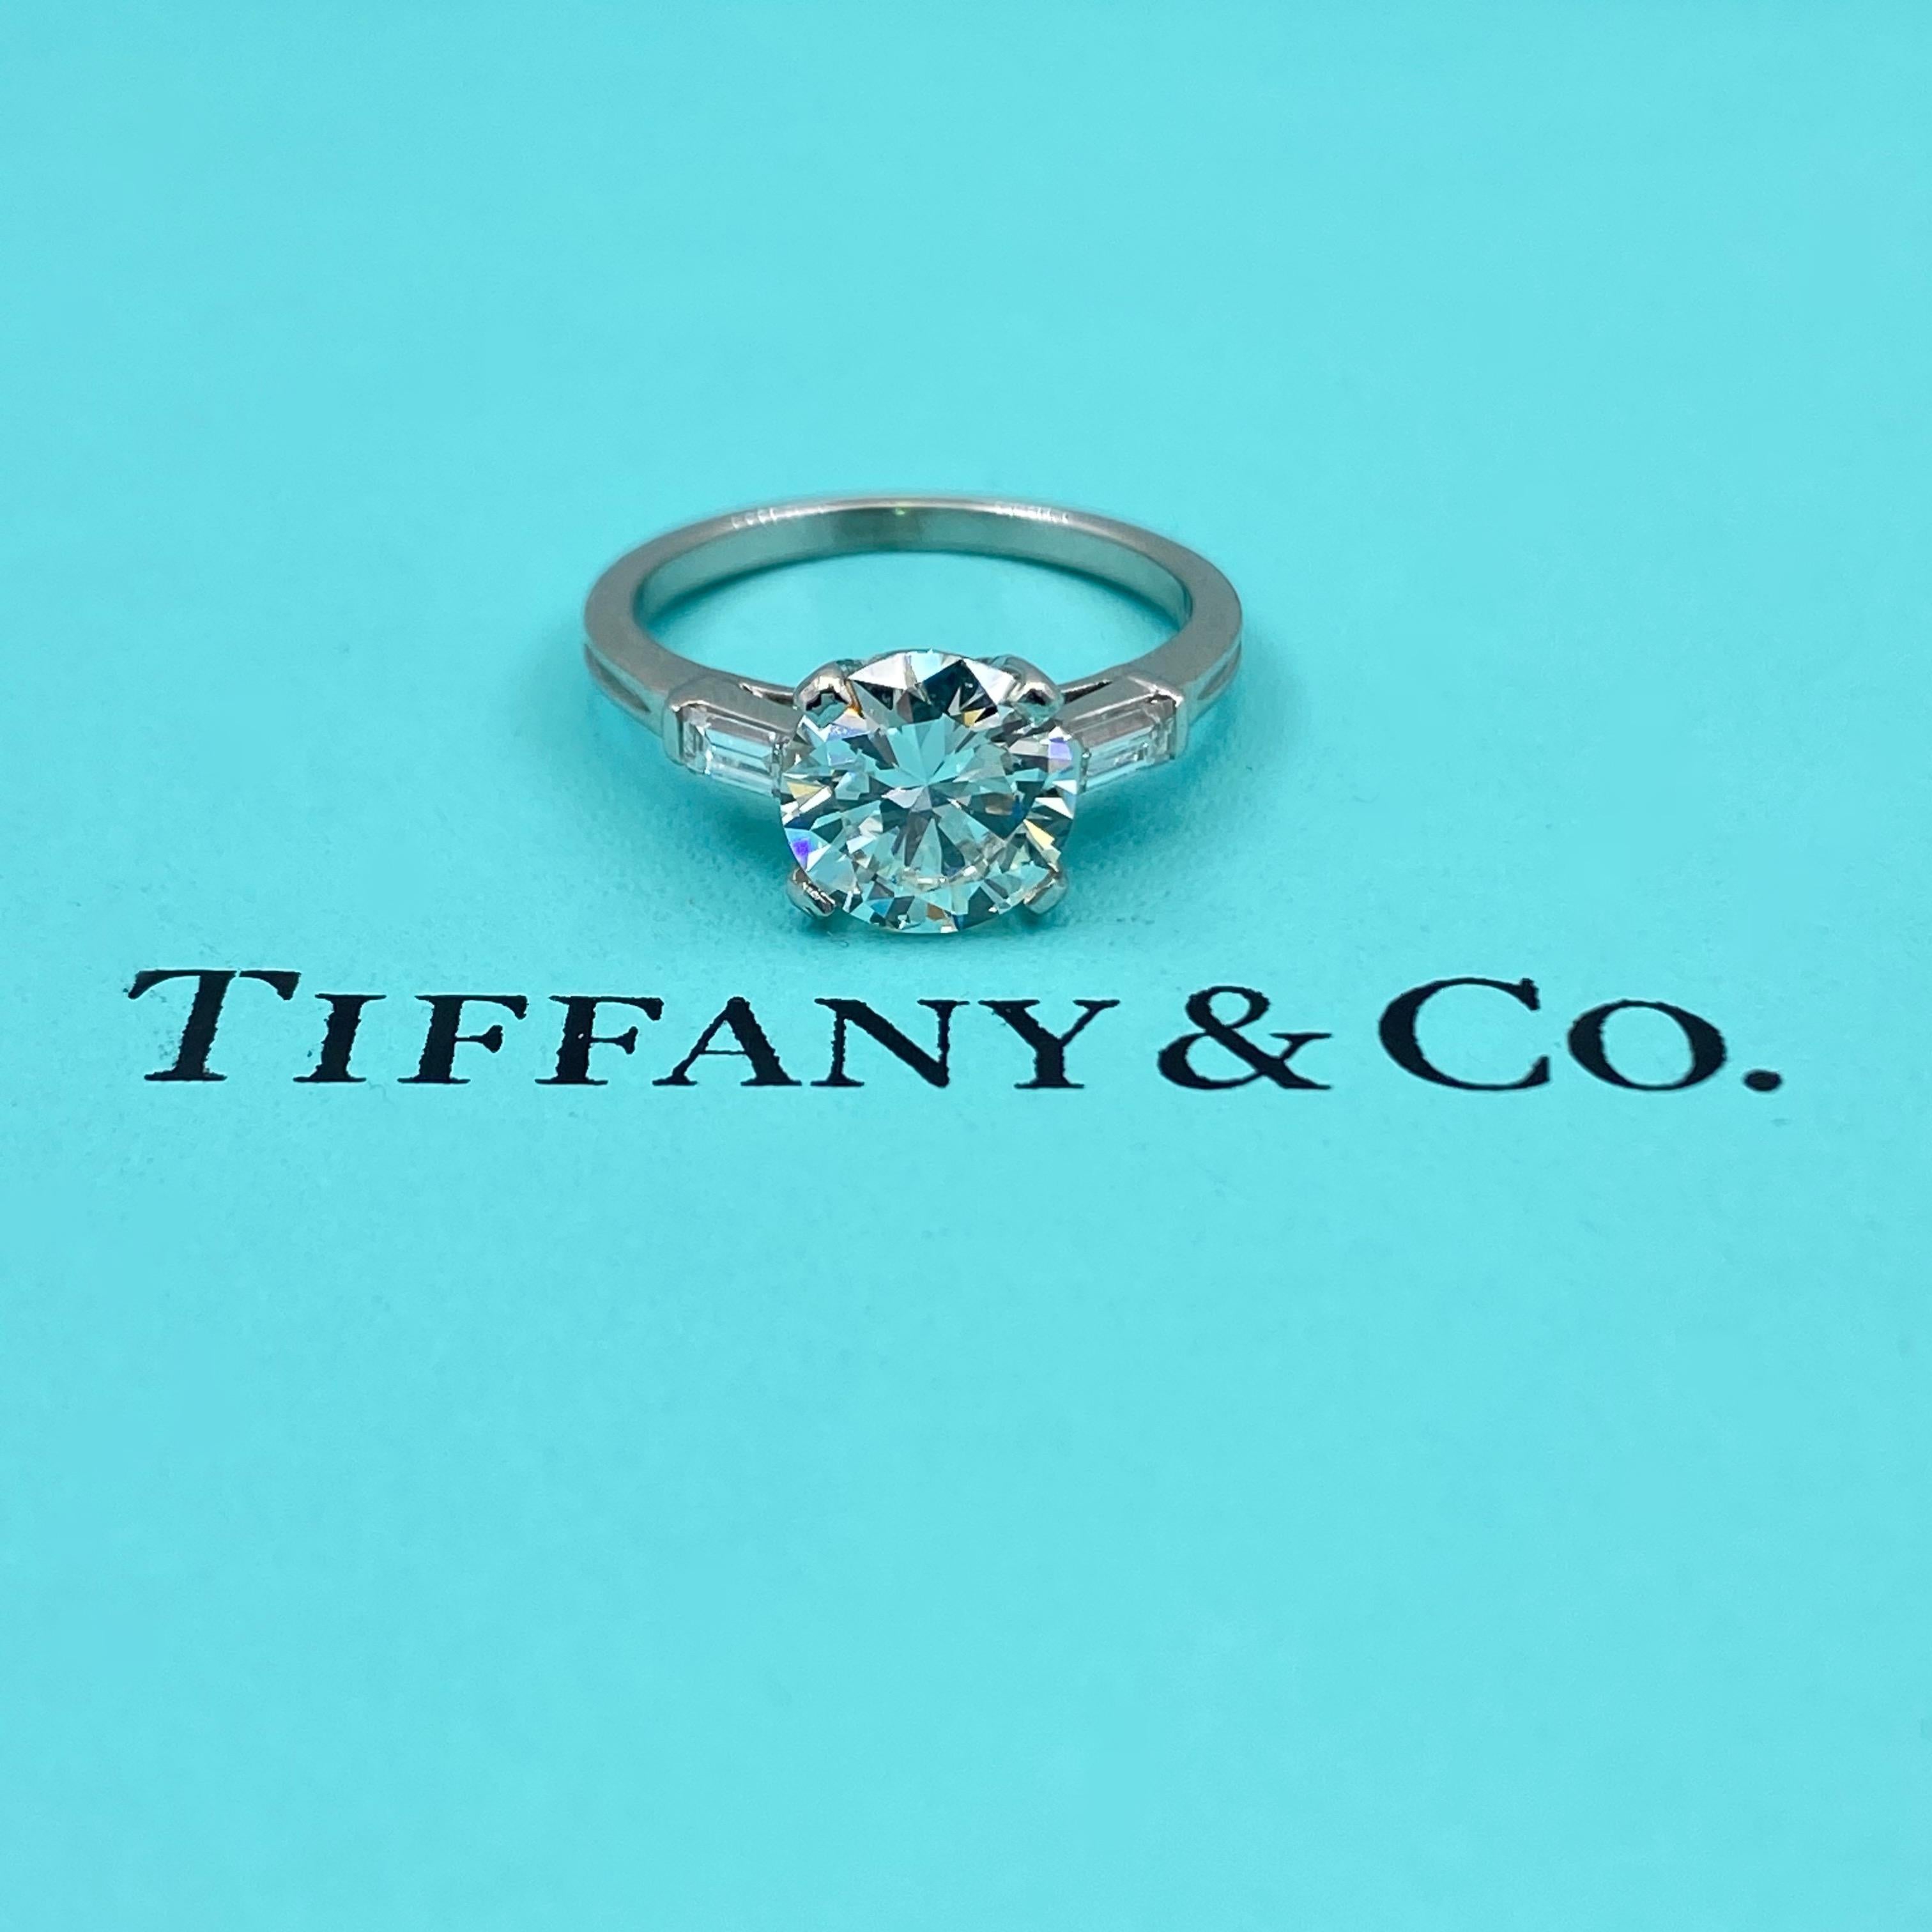 Vintage Tiffany & Company Diamond Ring
Style:  Classic 1950's Tiffany Engagement Ring
Metal:  Platinum 
Size / Measurements:  5, sizable
TCW:  1.72 Carats Total
Main Diamond:  1.52 Round Brilliant Cut
Color & Clarity:  H Color,  VS2 Clarity
Accent